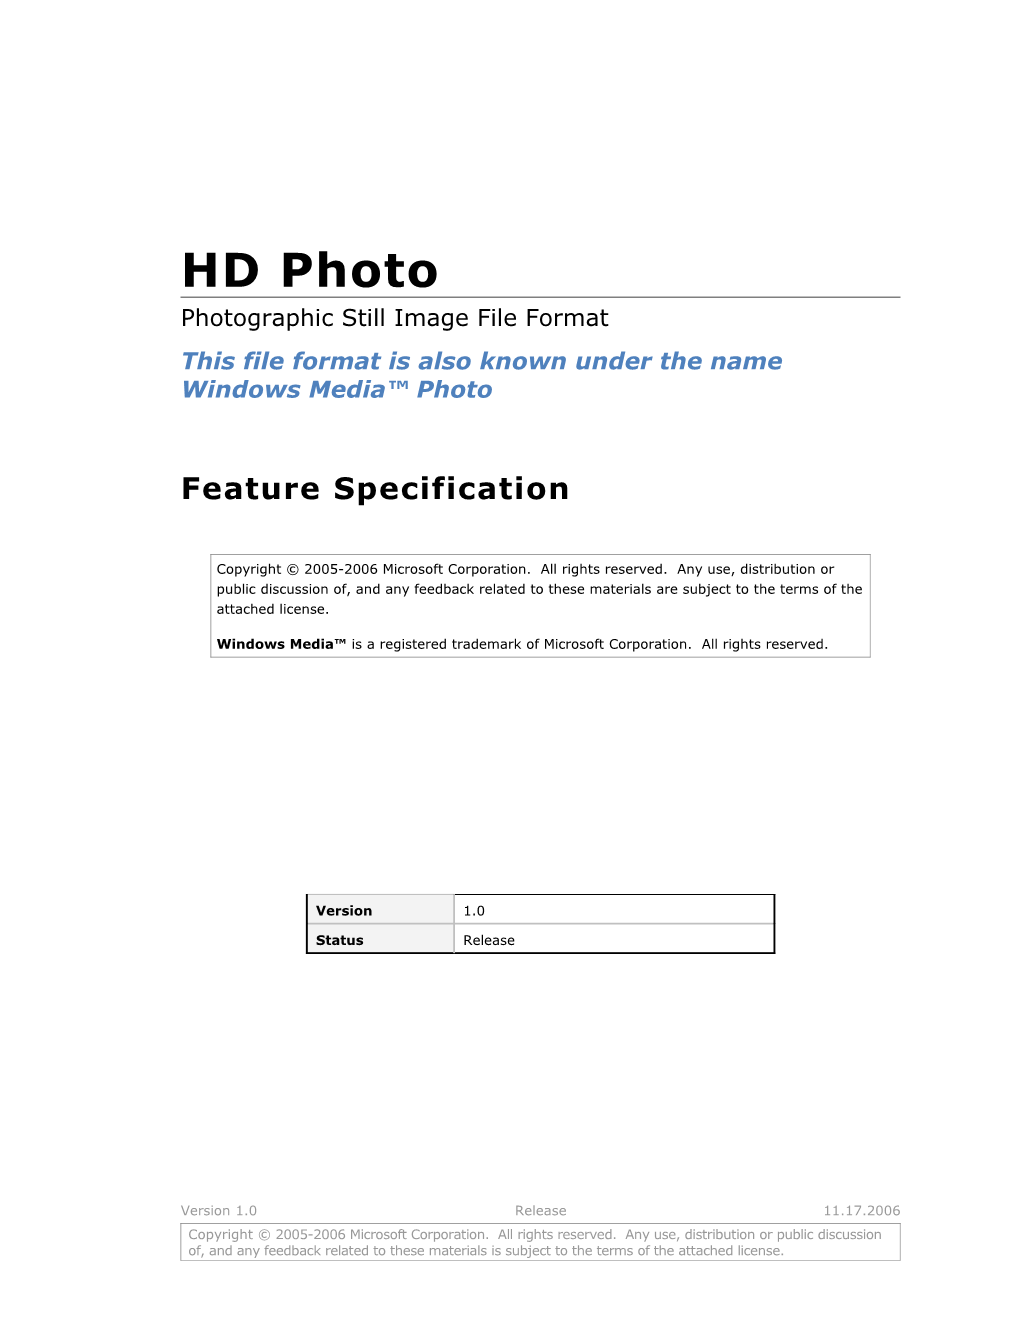 This File Format Is Also Known Under the Name Windows Media Photo